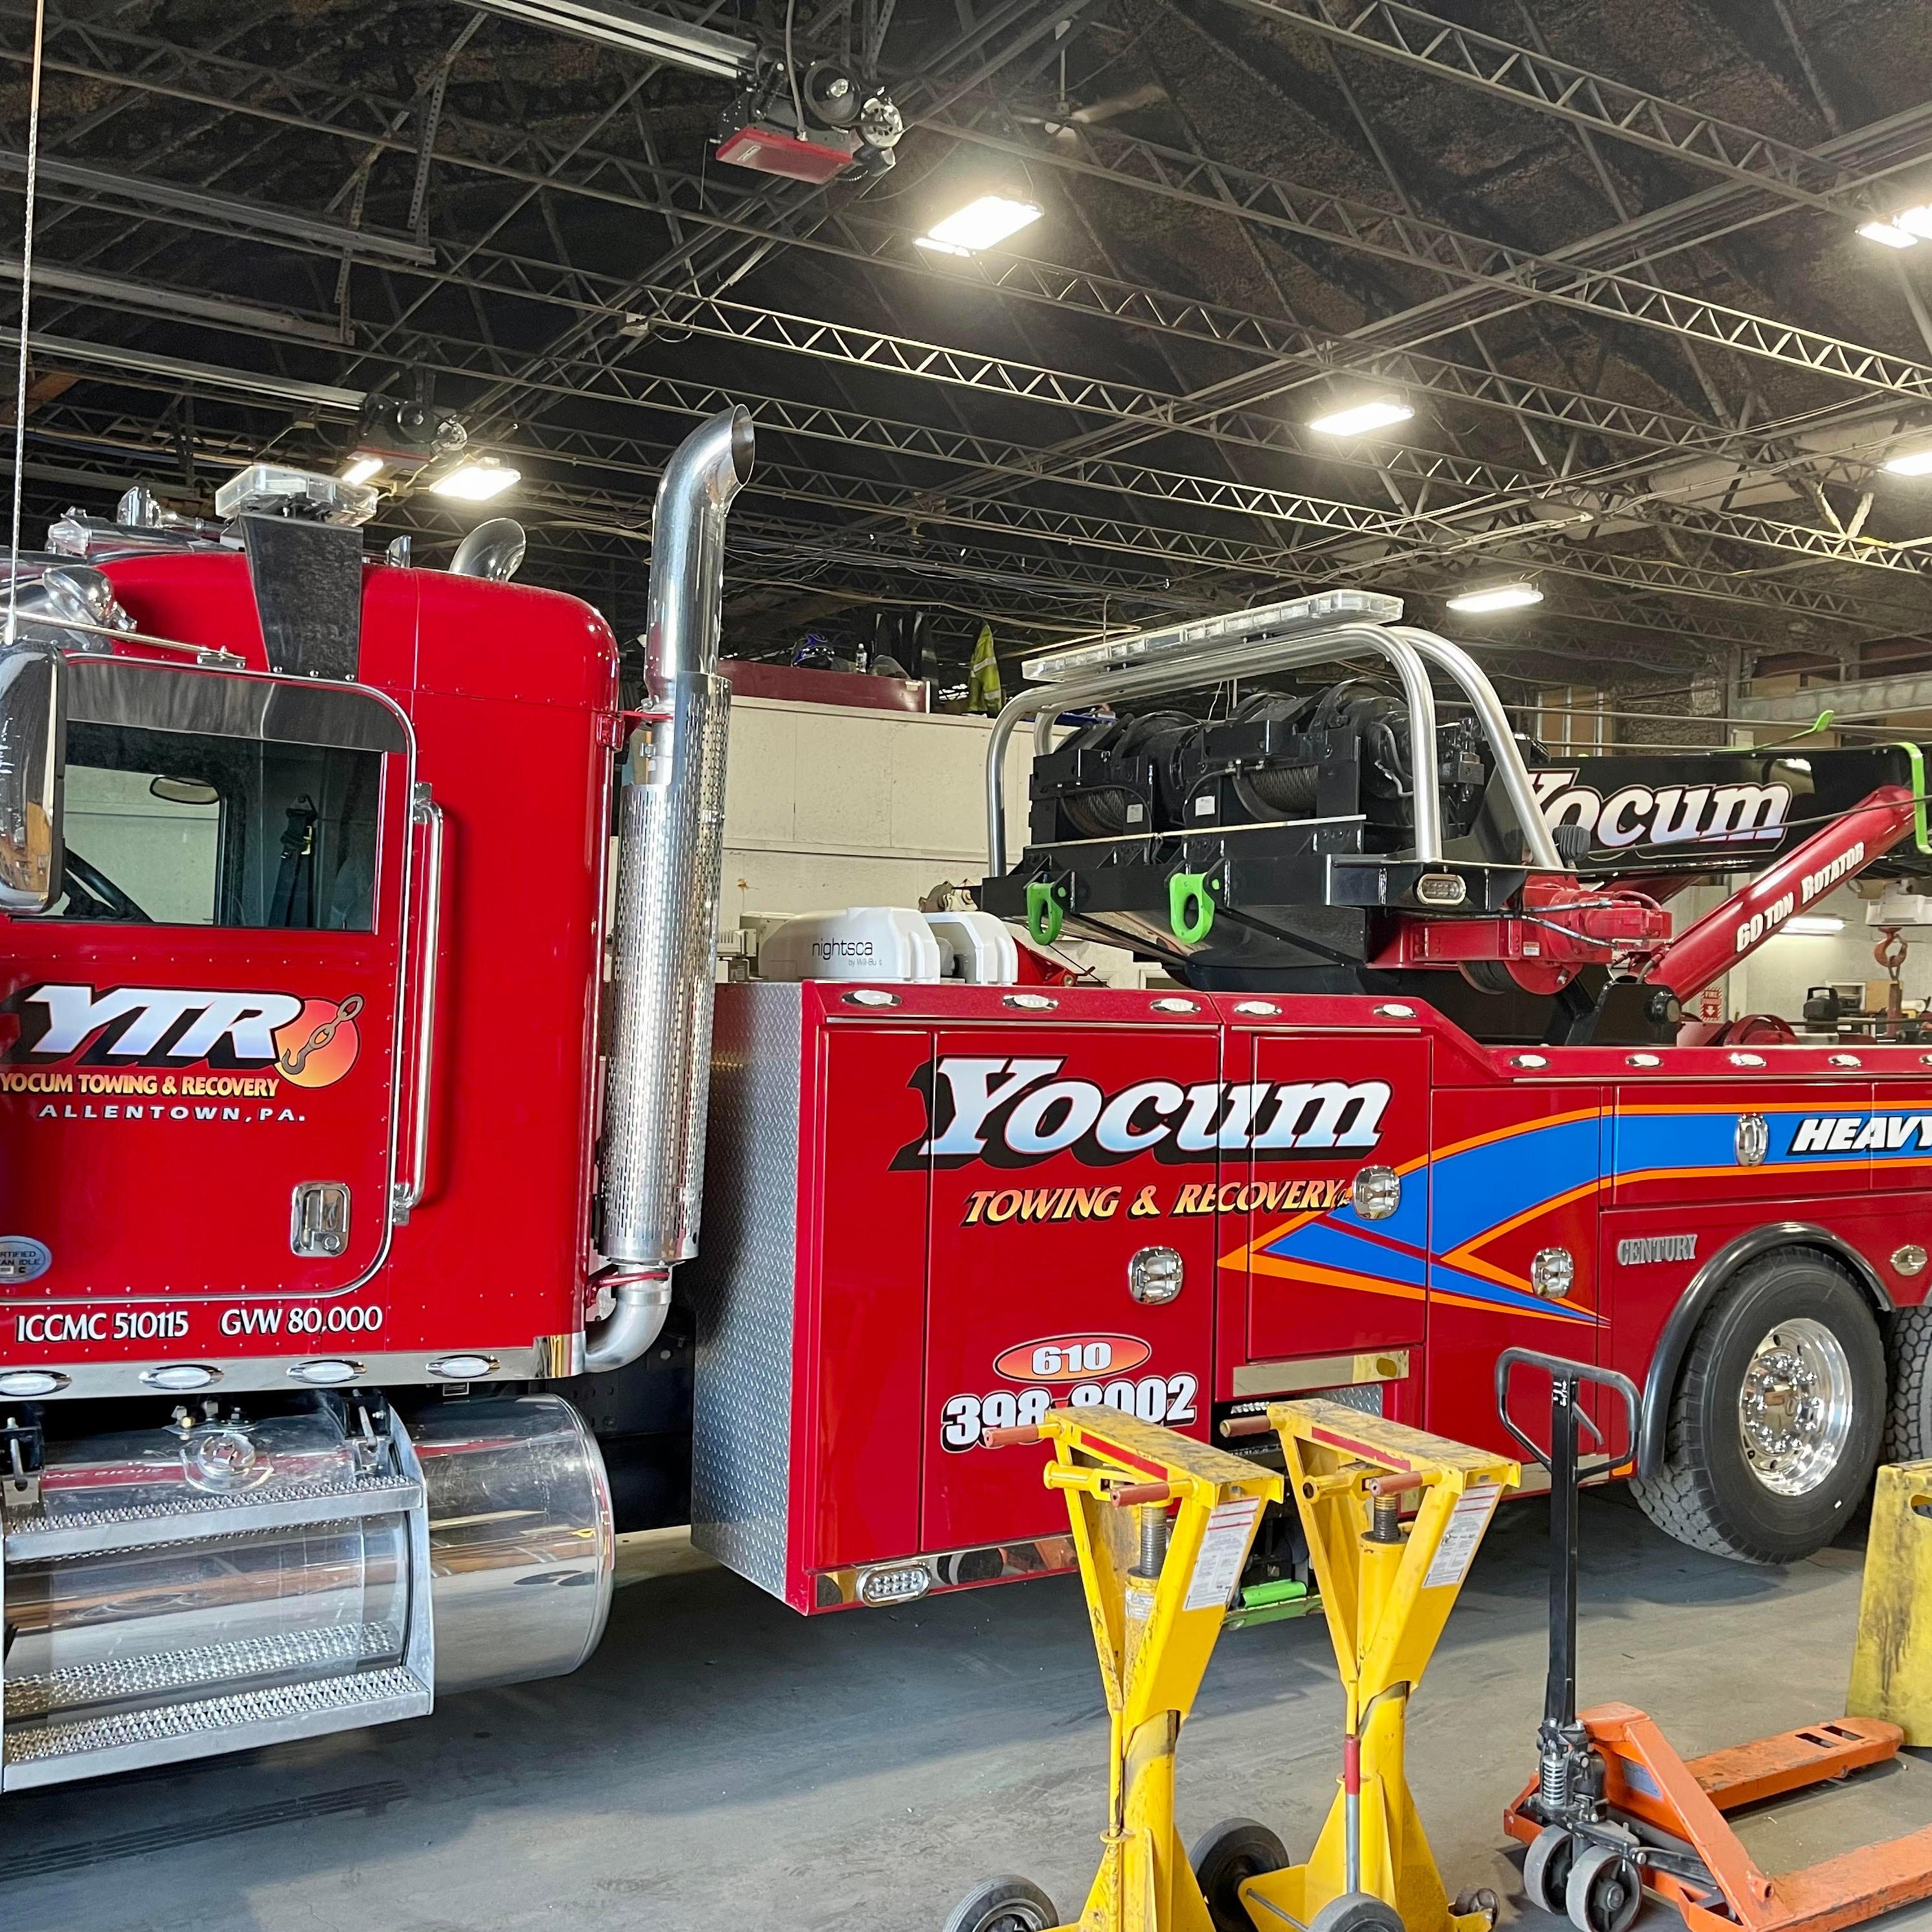 Yocum Towing & Recovery - Allentown, PA 18104 - (610)398-8002 | ShowMeLocal.com